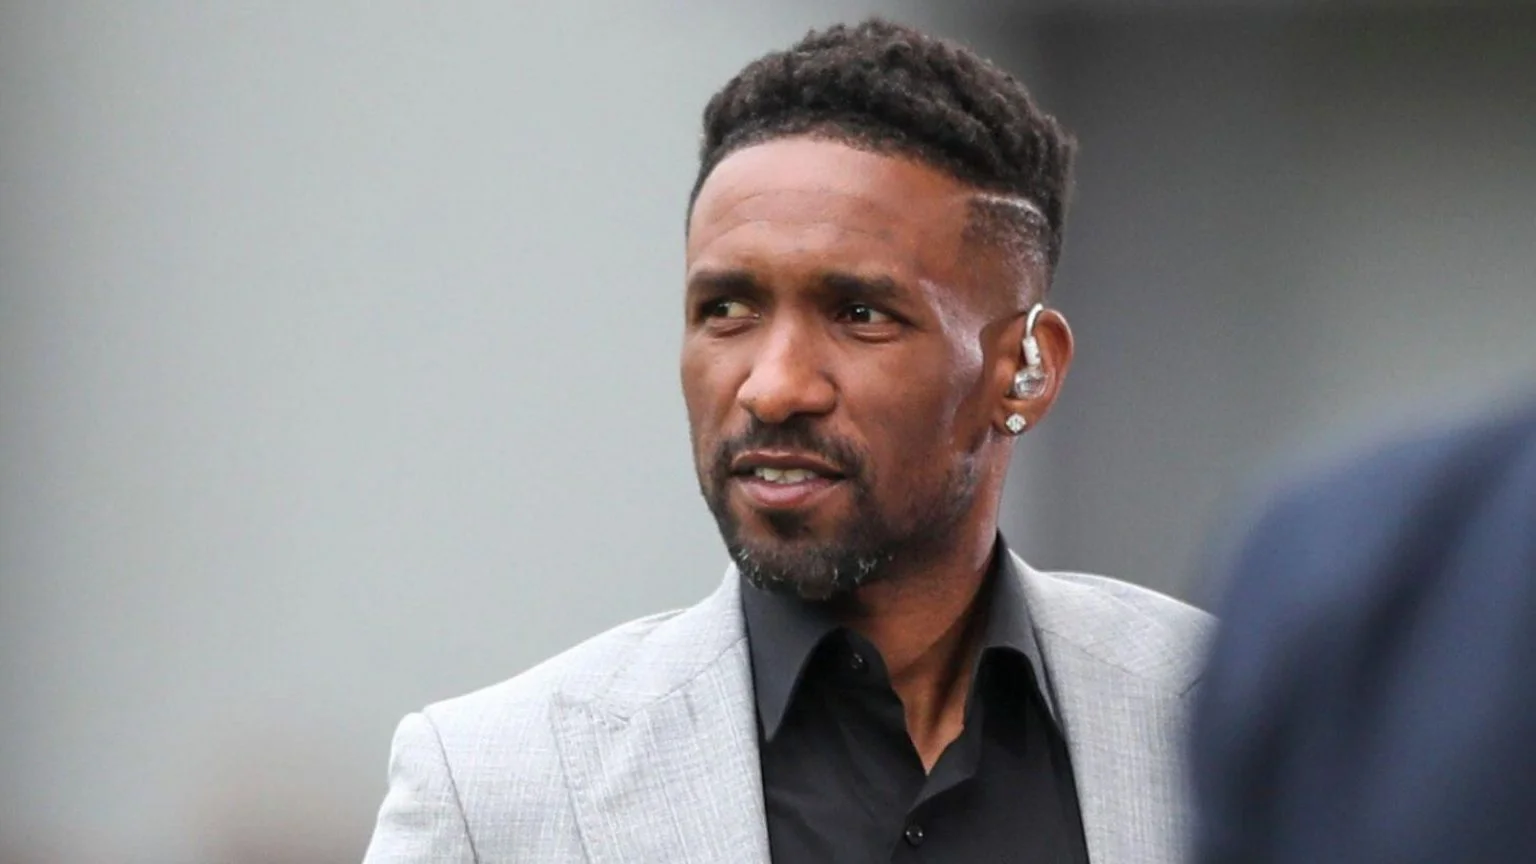 2023 Ballon d’Or: You’ve to give him – Jermain Defoe on player to win award